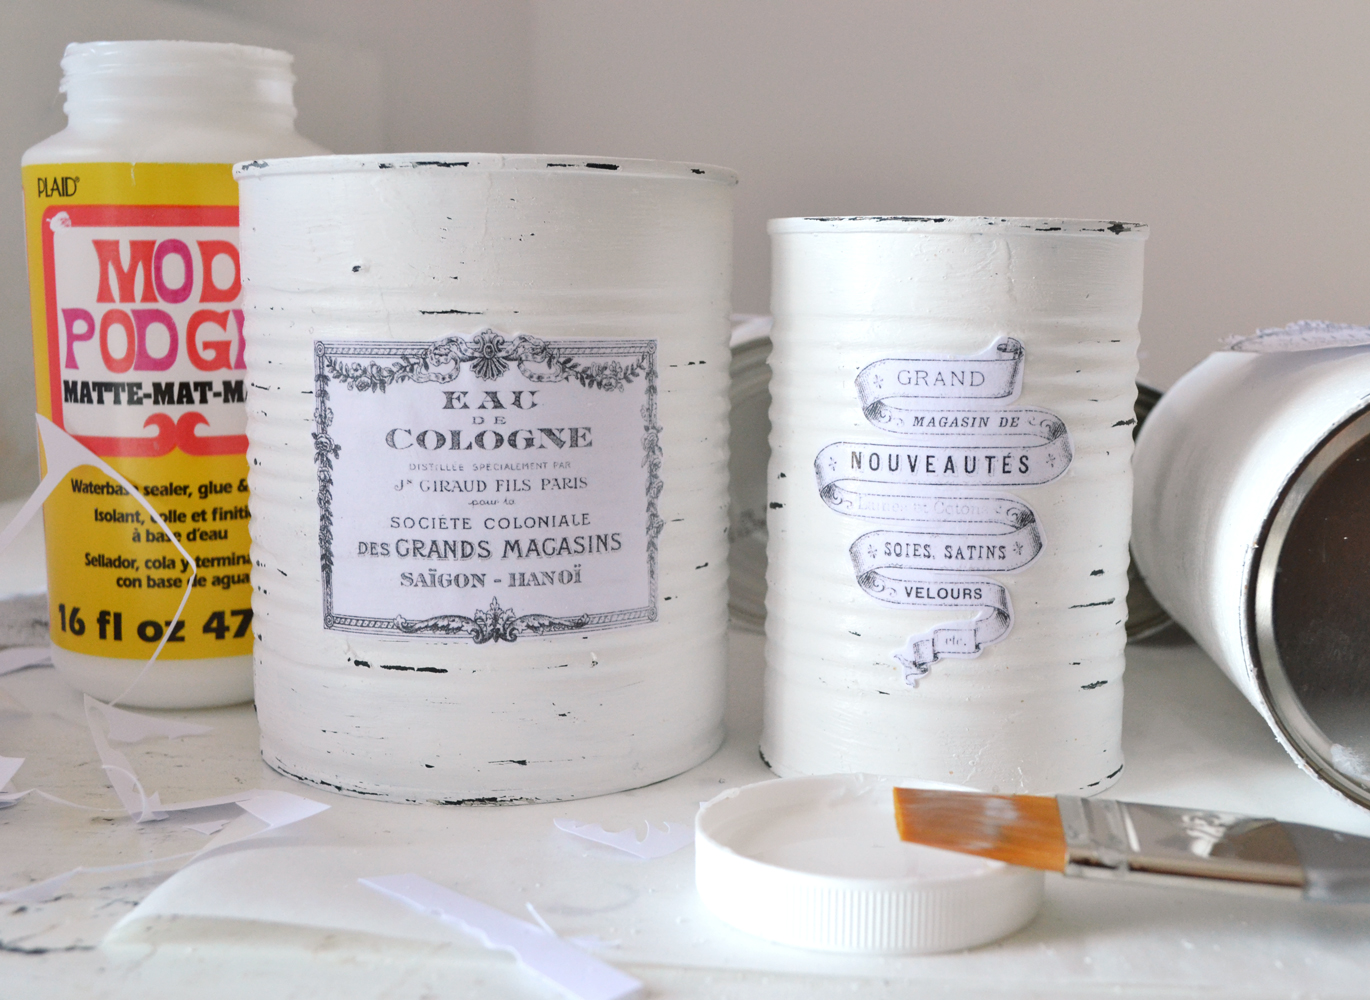 DIY Vintage French Recycled Tin Cans & free printable - by Dreams Factory for The Graphics Fairy #vintage #French #freeprintable #frenchephemera #frenchtypography #diy